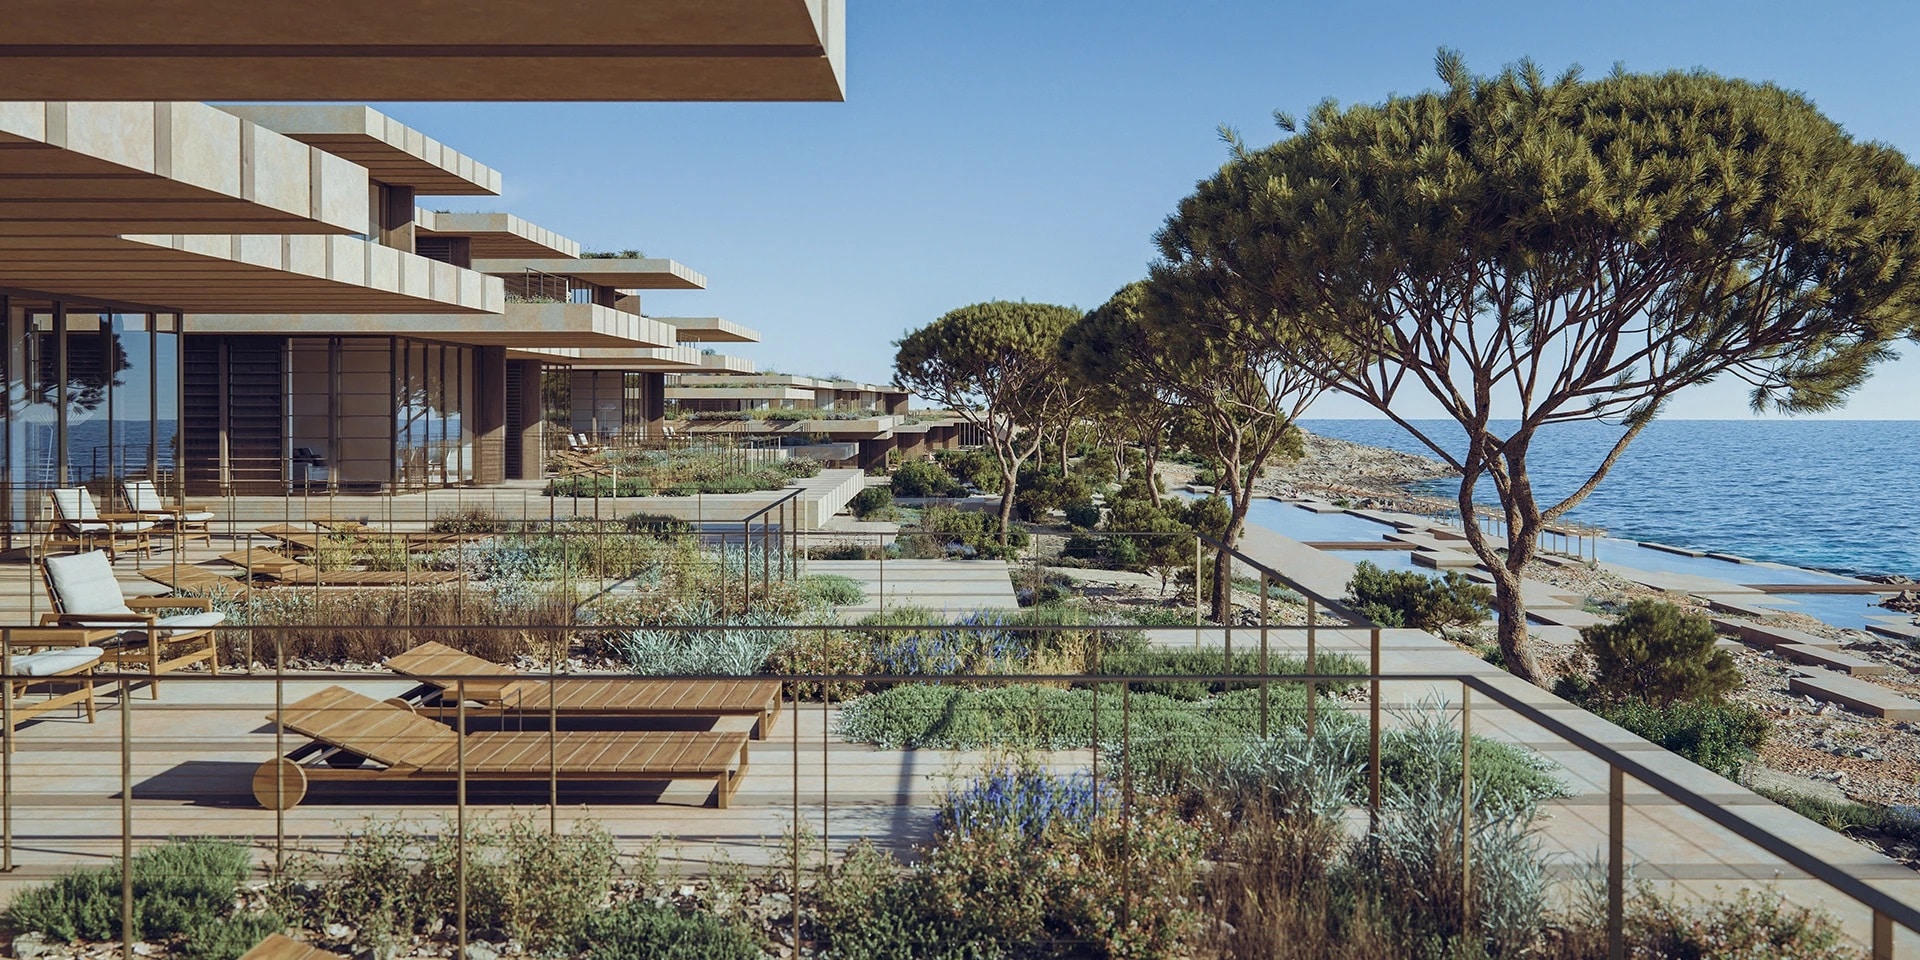 Exterior view of Six Senses Comino resort in Malta, showcasing modern low-rise suites, lush greenery, and expansive terraces with lounge chairs, all overlooking the pristine Mediterranean Sea.